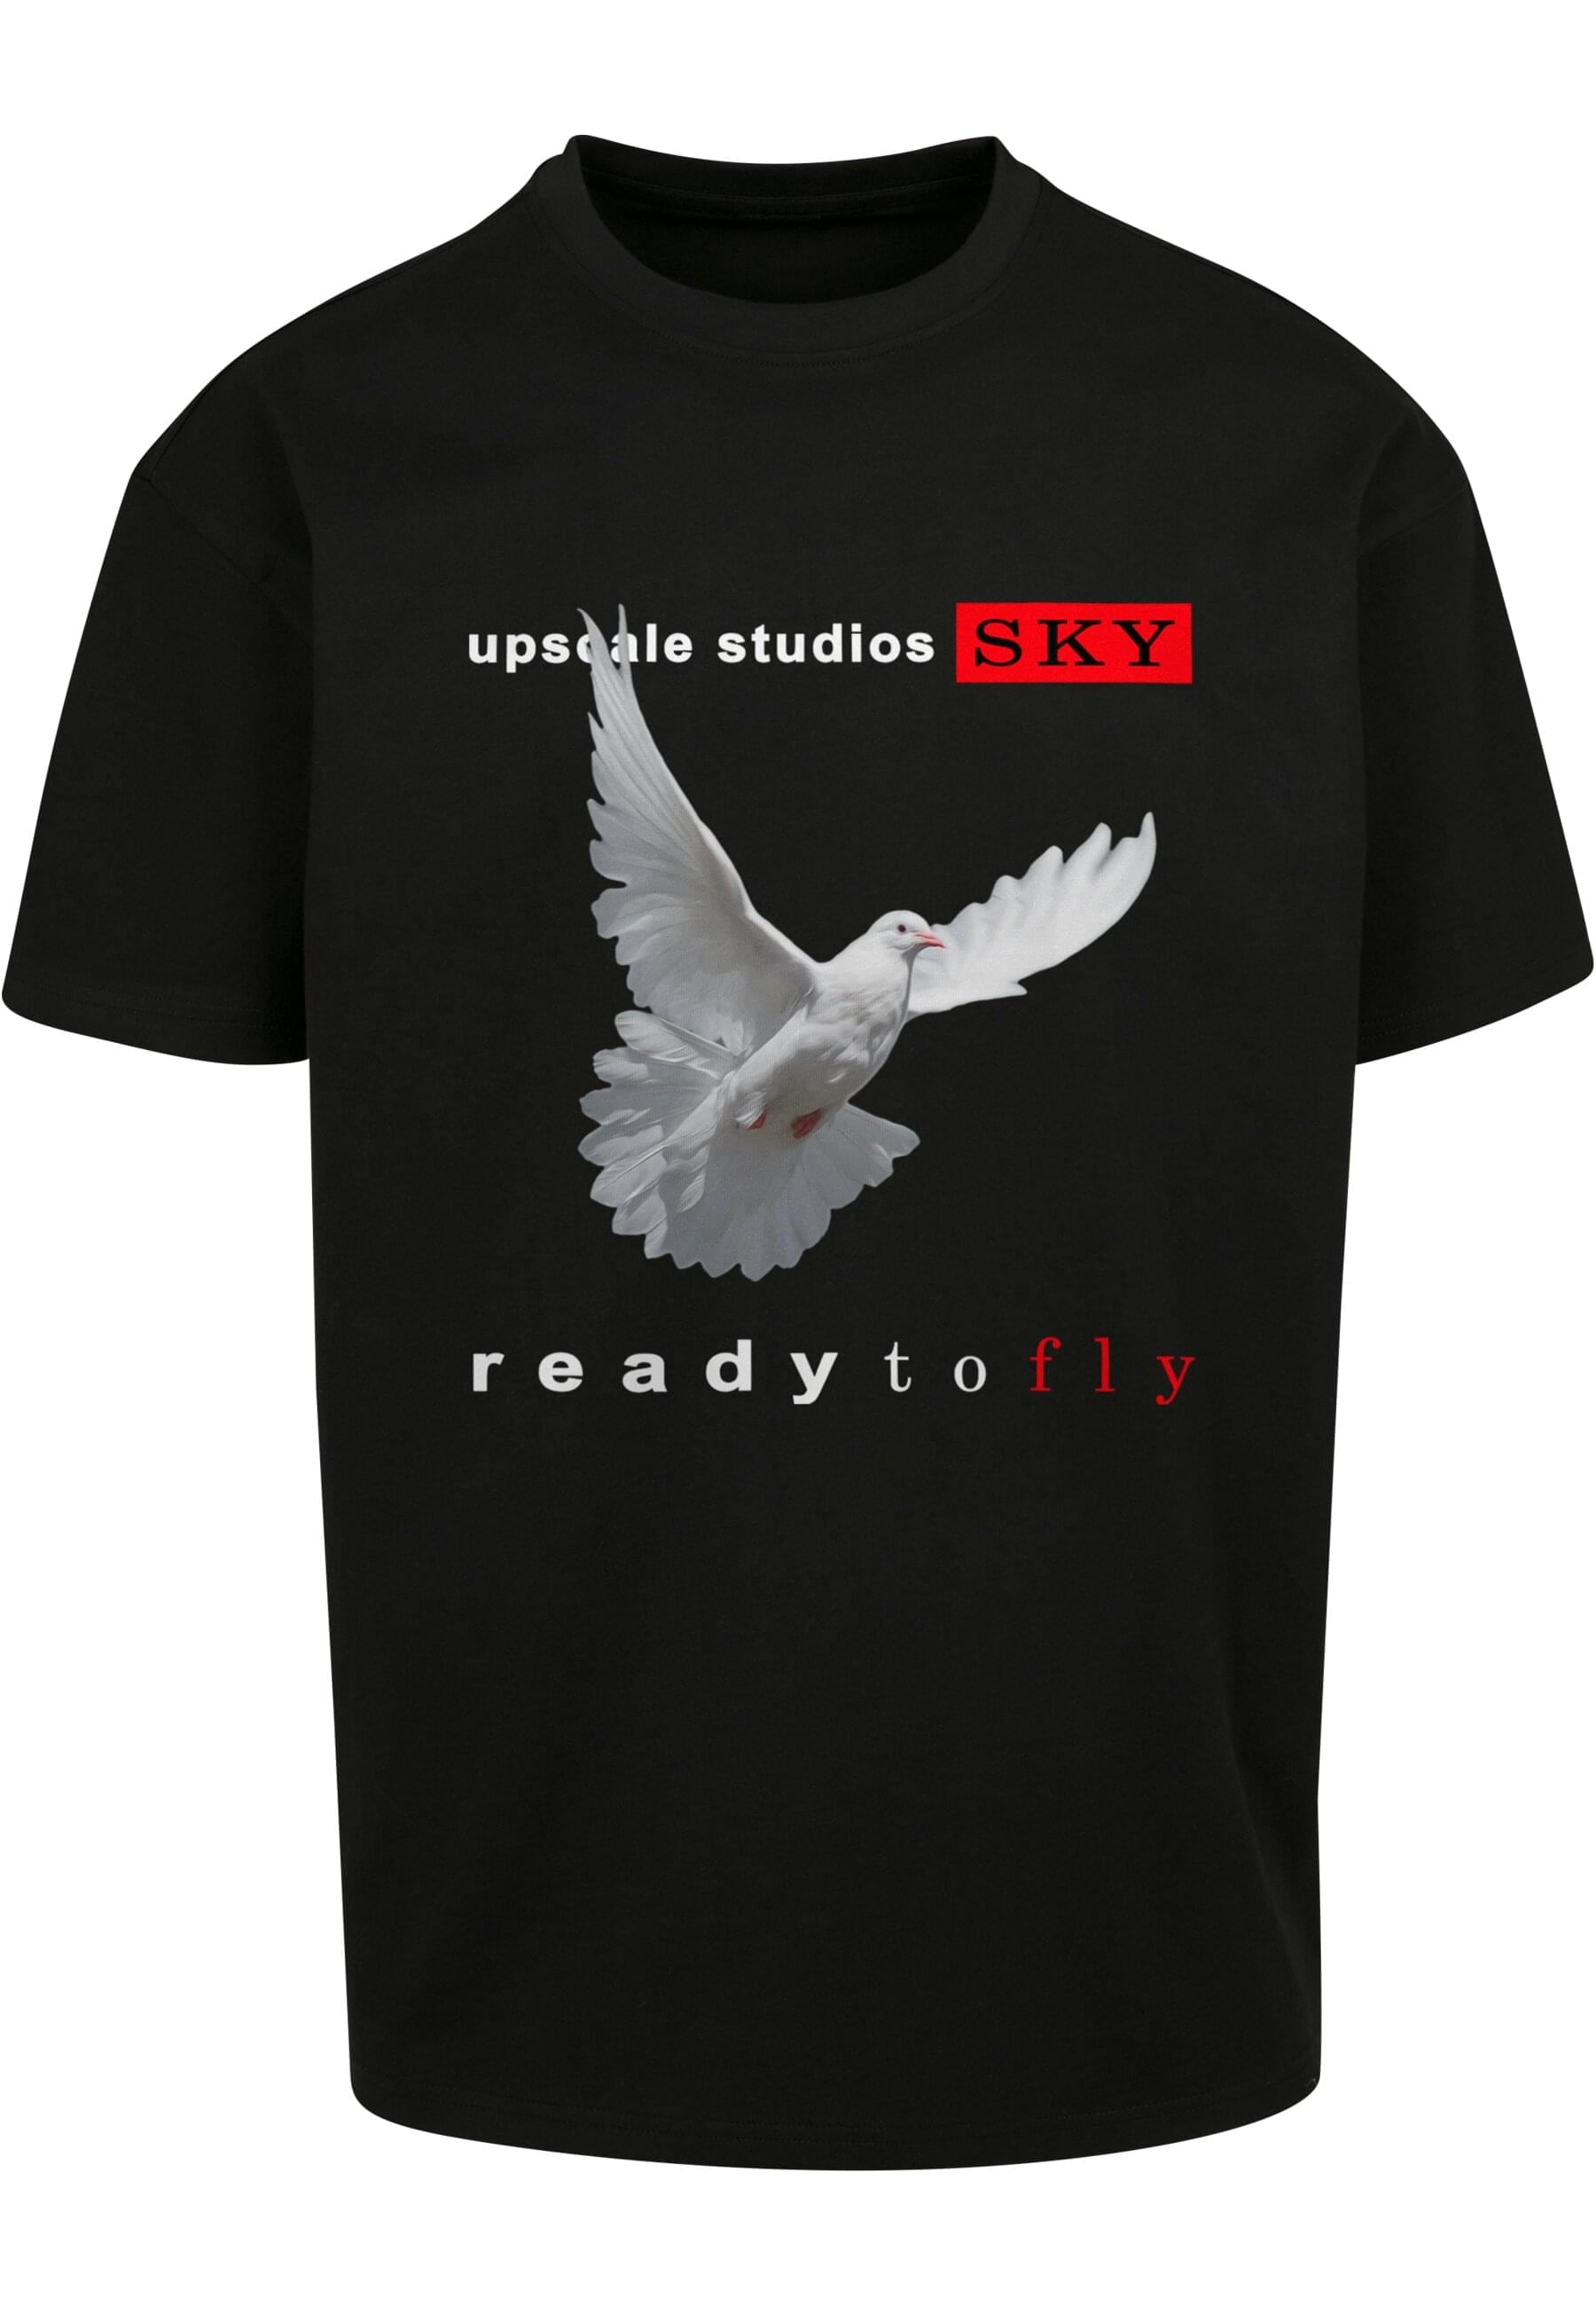 Tee Tee«, | fly BAUR Oversize by Mister Upscale to (1 kaufen T-Shirt tlg.) ▷ »Unisex Ready